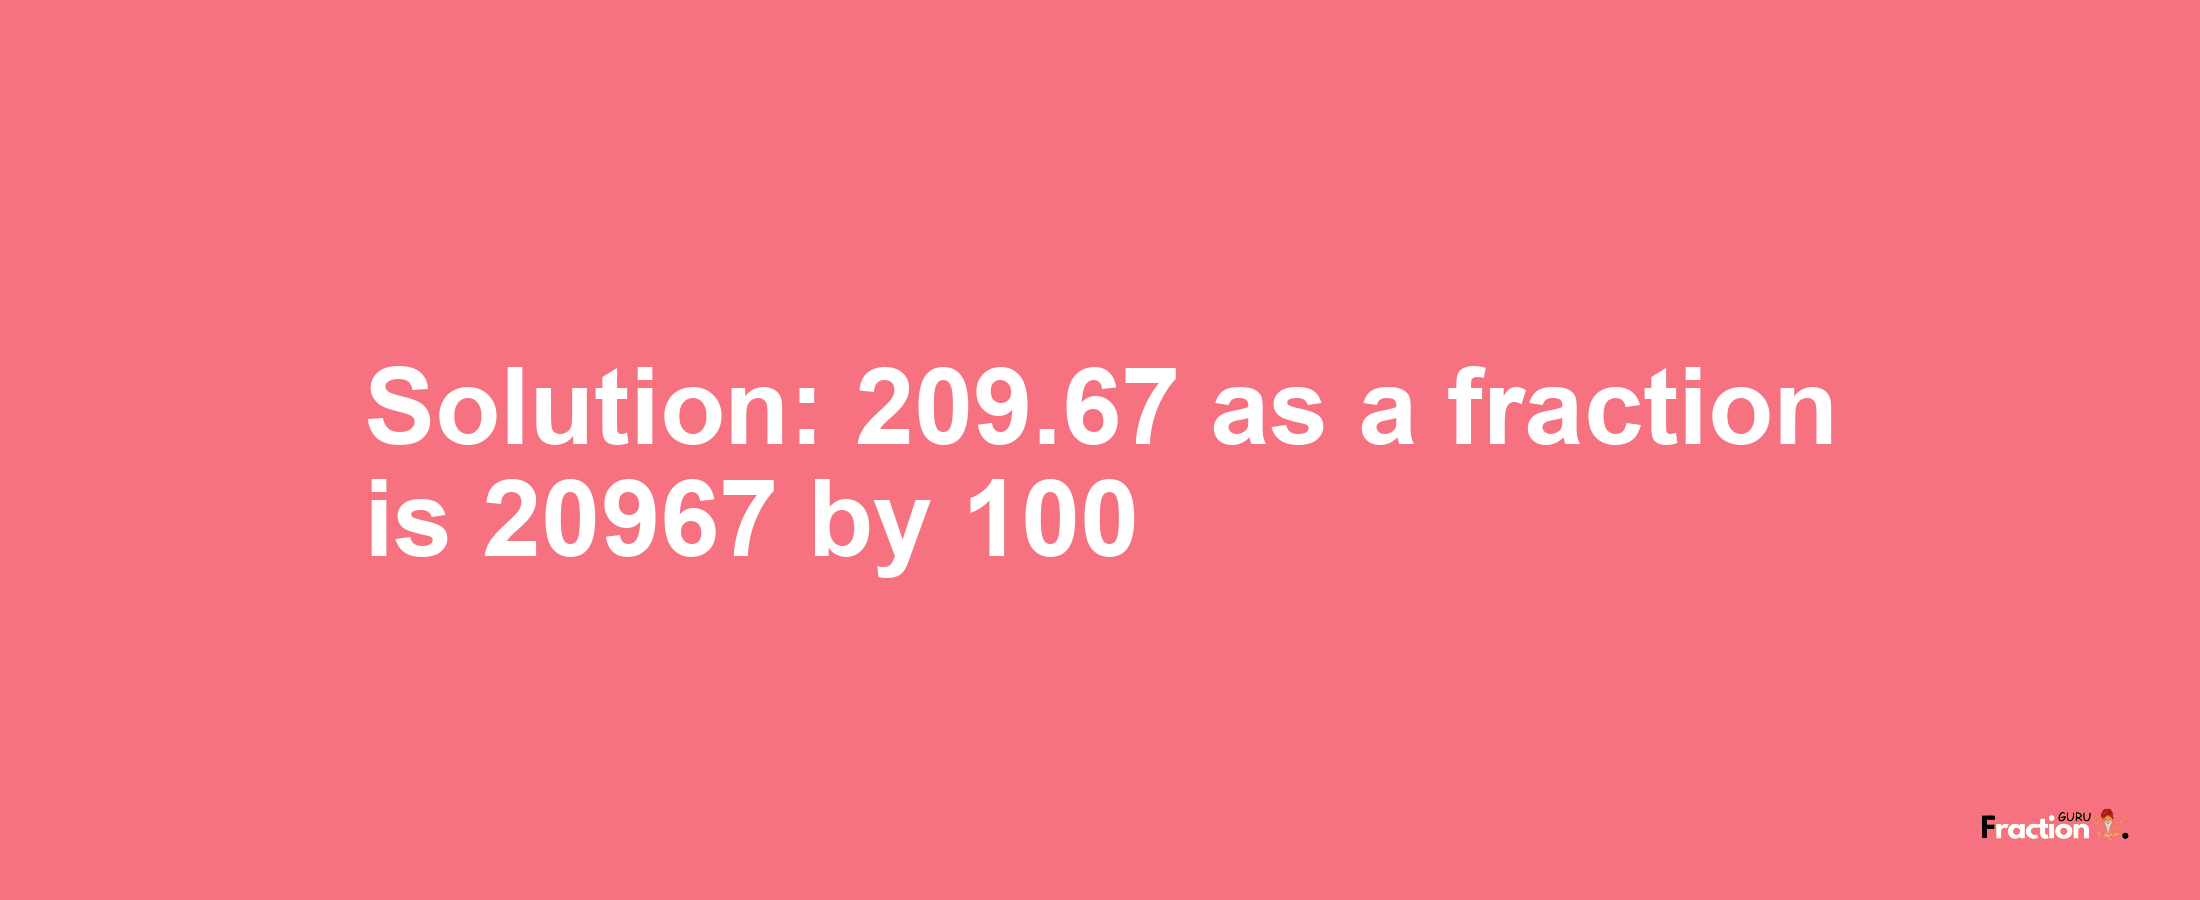 Solution:209.67 as a fraction is 20967/100